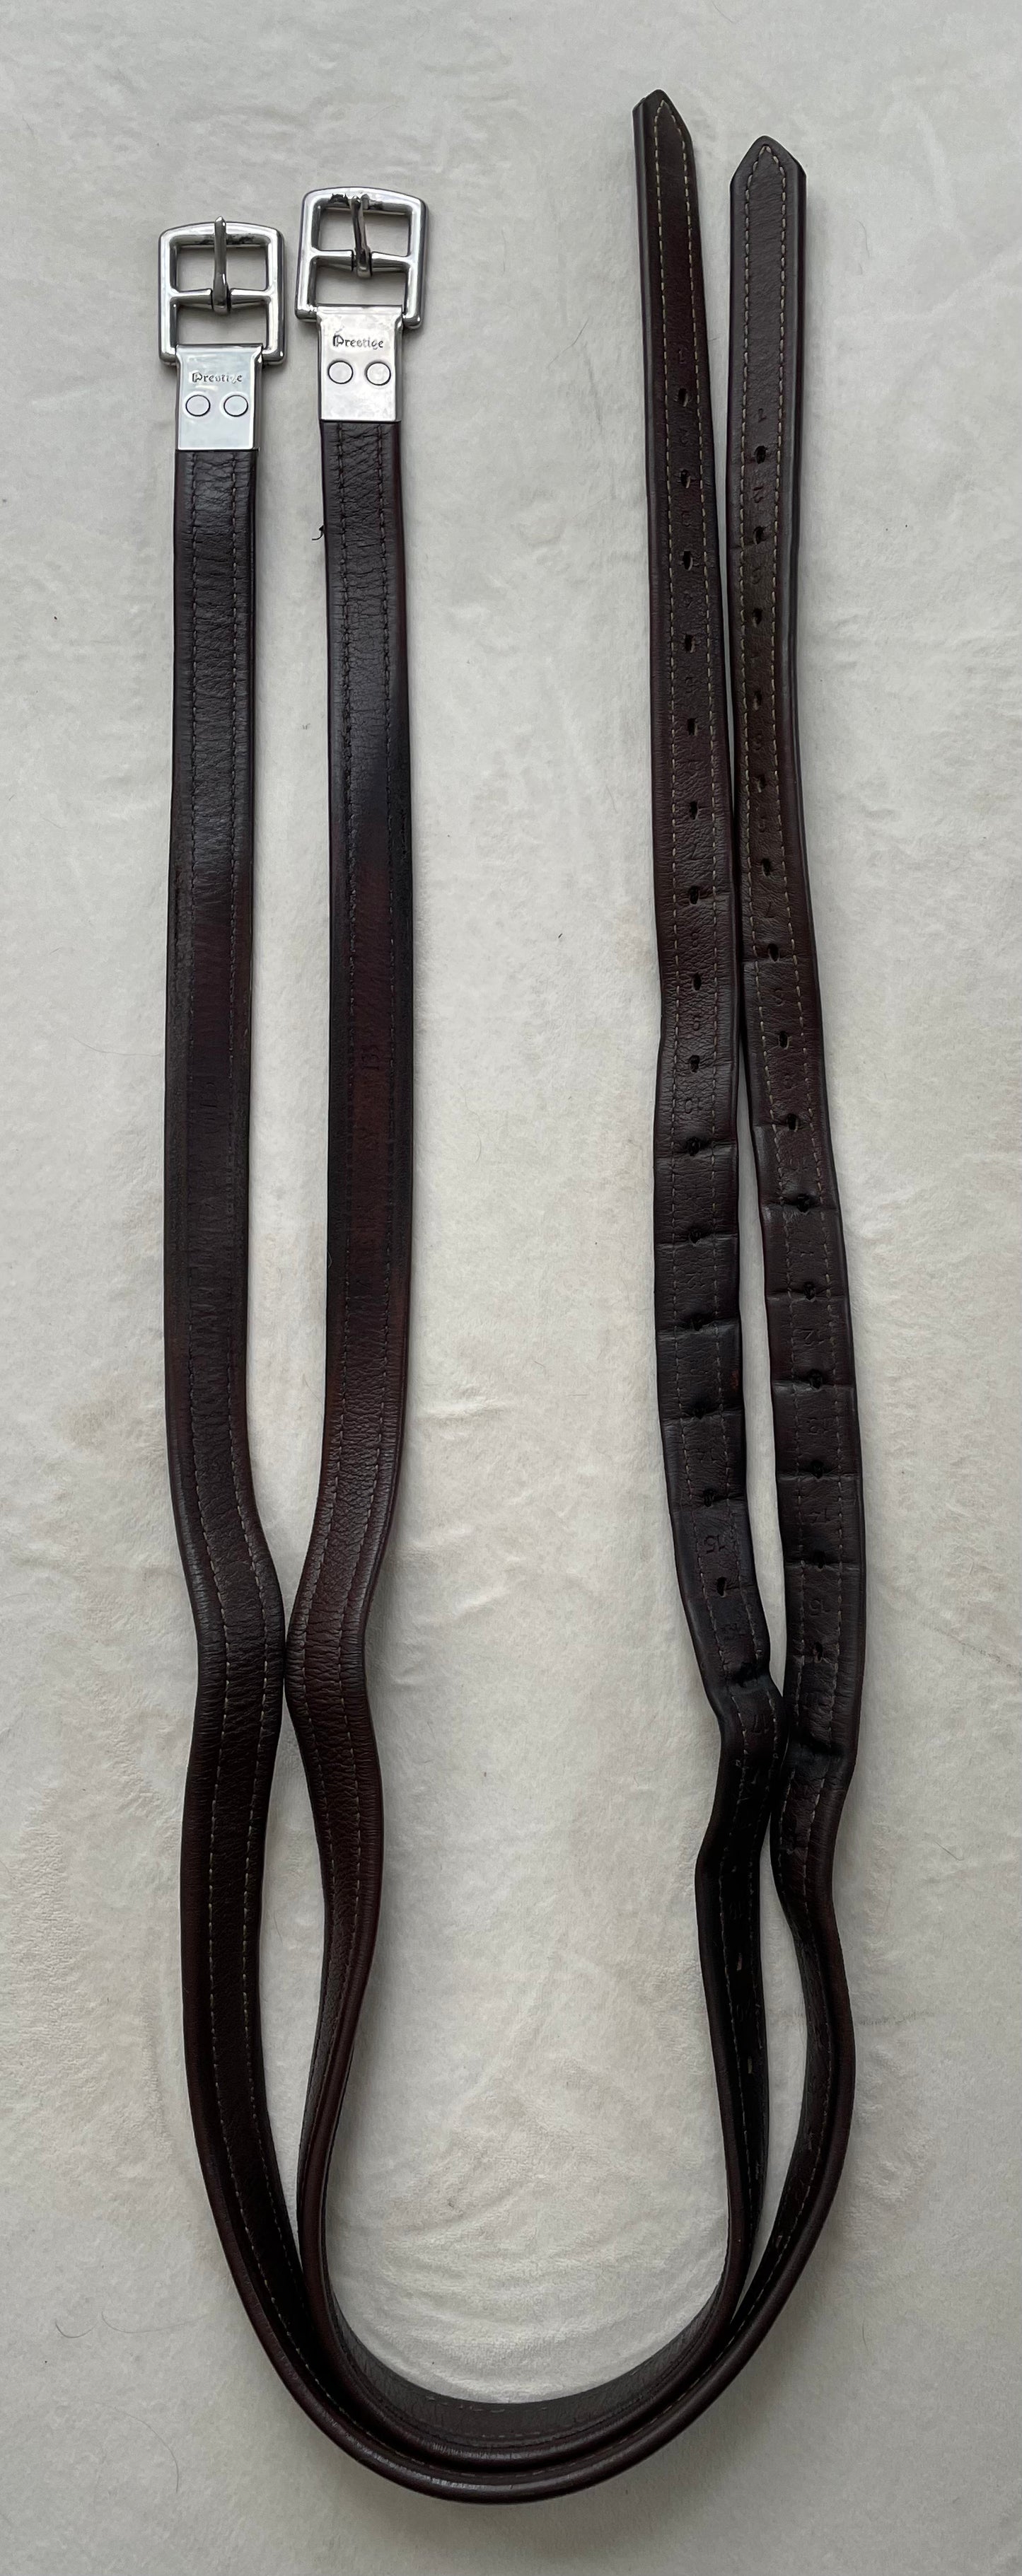 Prestige Stirrup Leathers, Brown, 135cm/54” - Good Used Condition